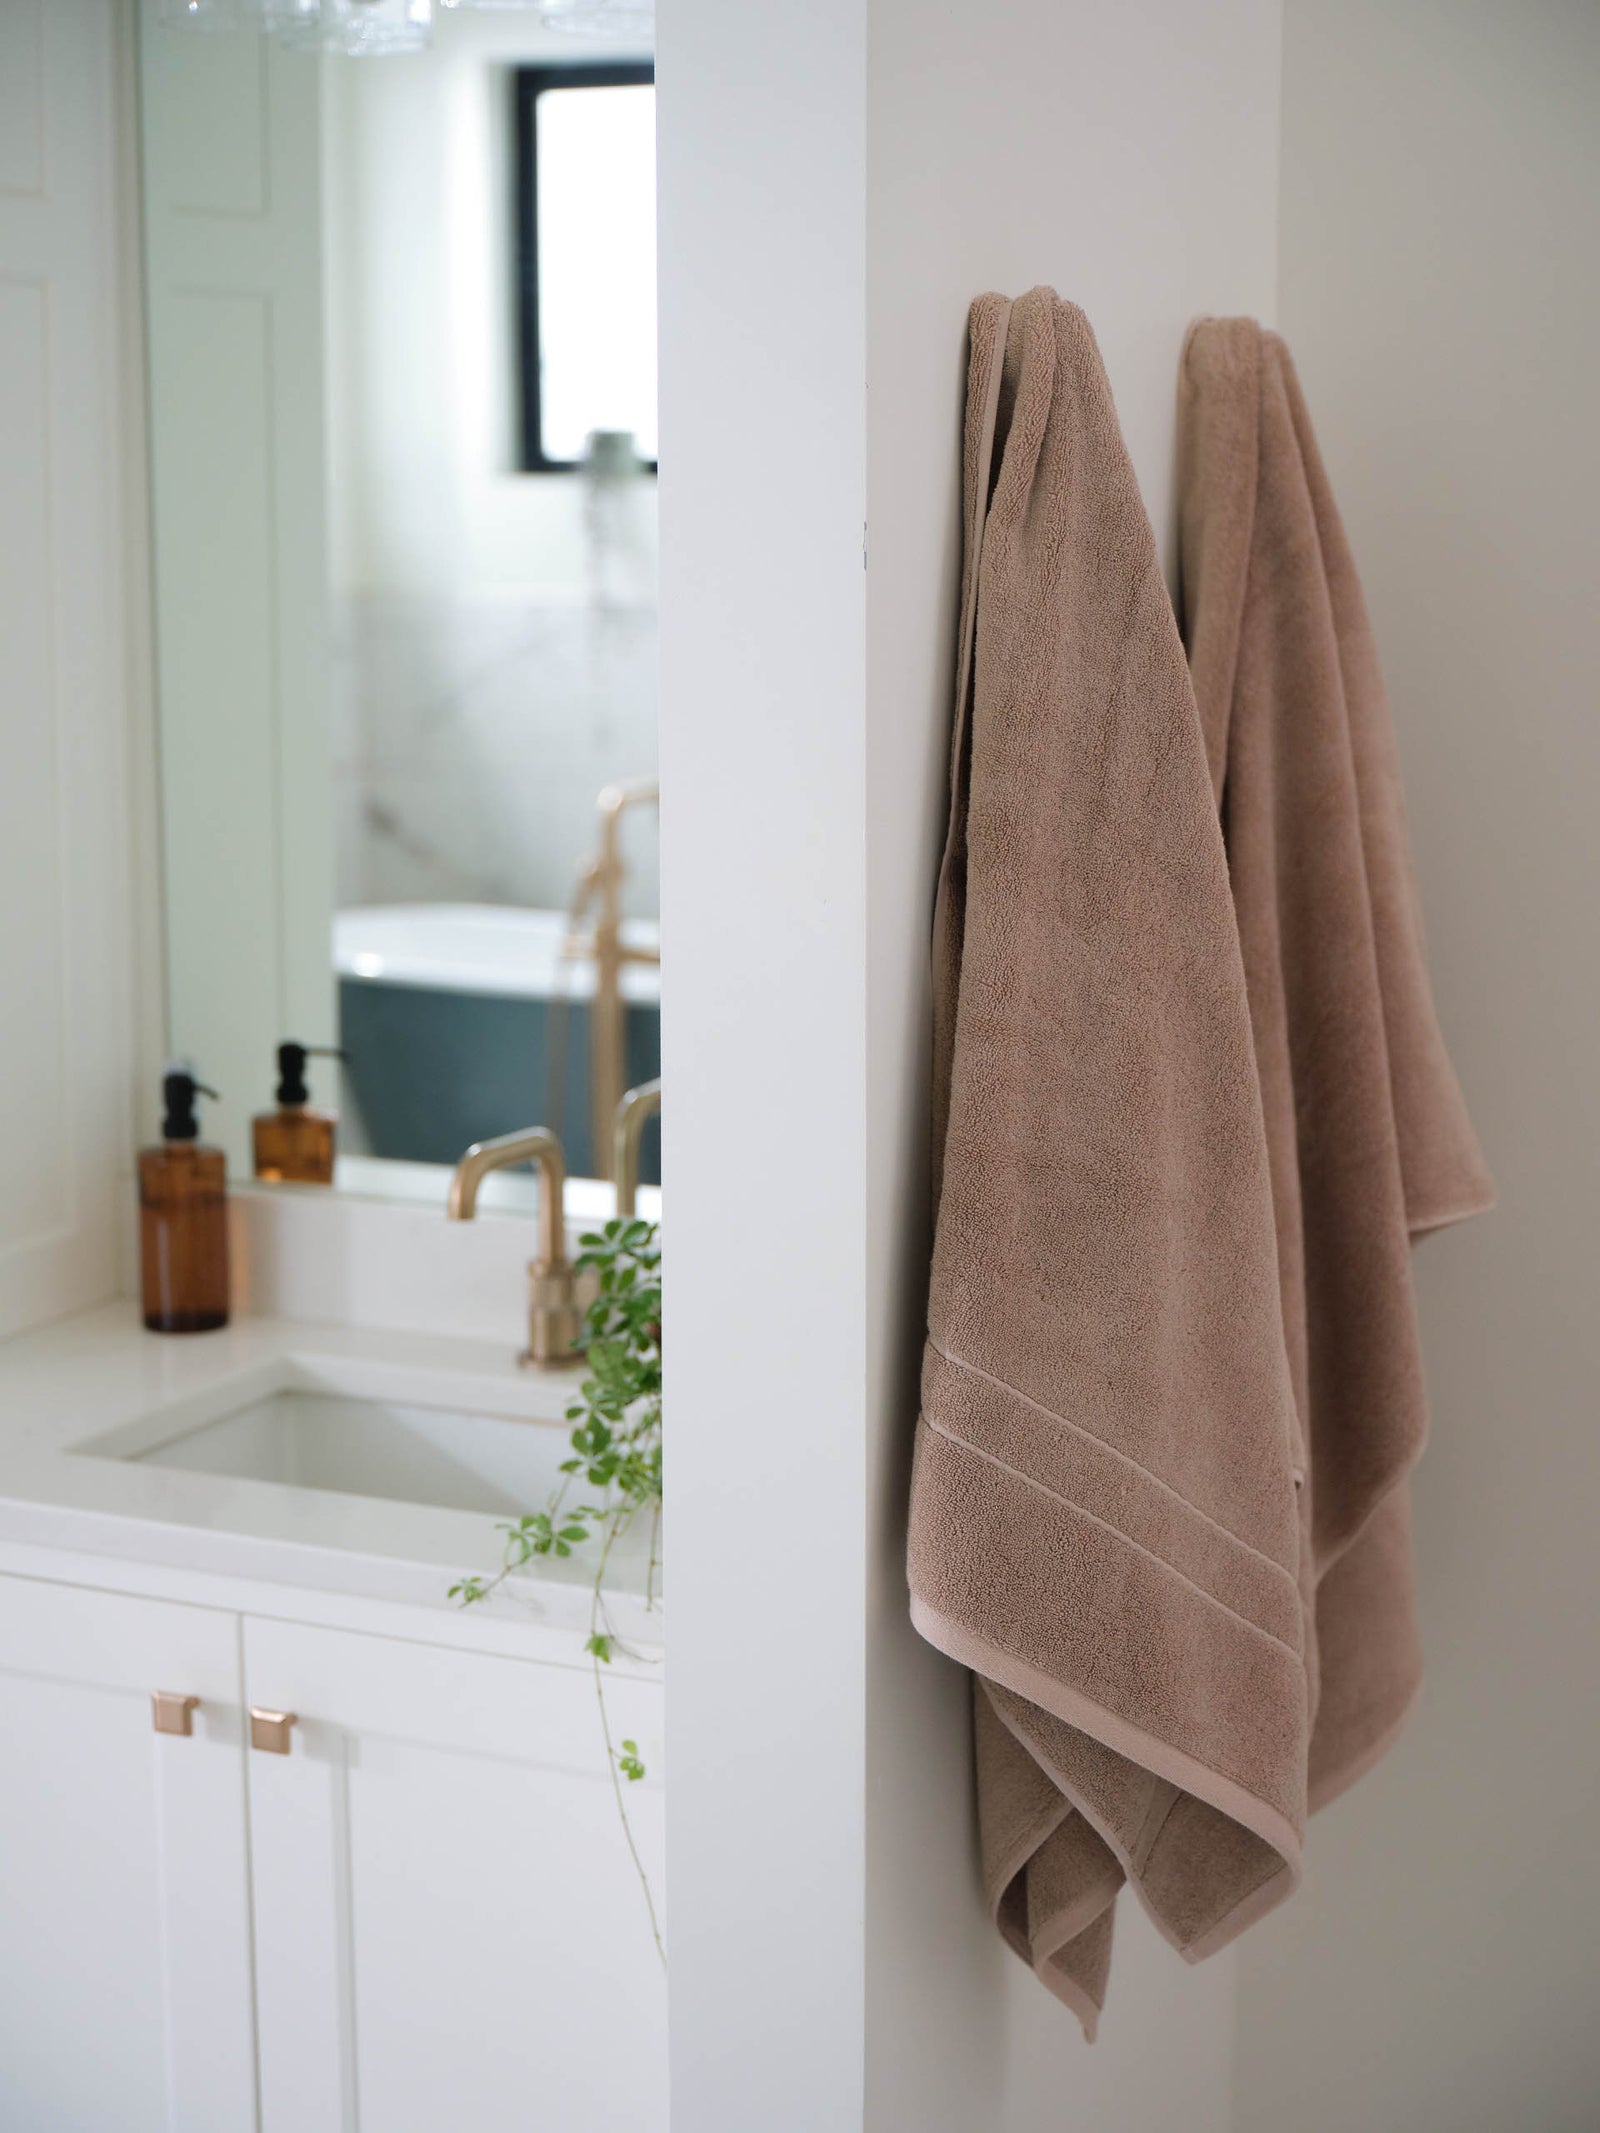 Premium Plush Bath Towel in the color Sand. The towels are hung from a towel hook on the wall of a bathroom. 